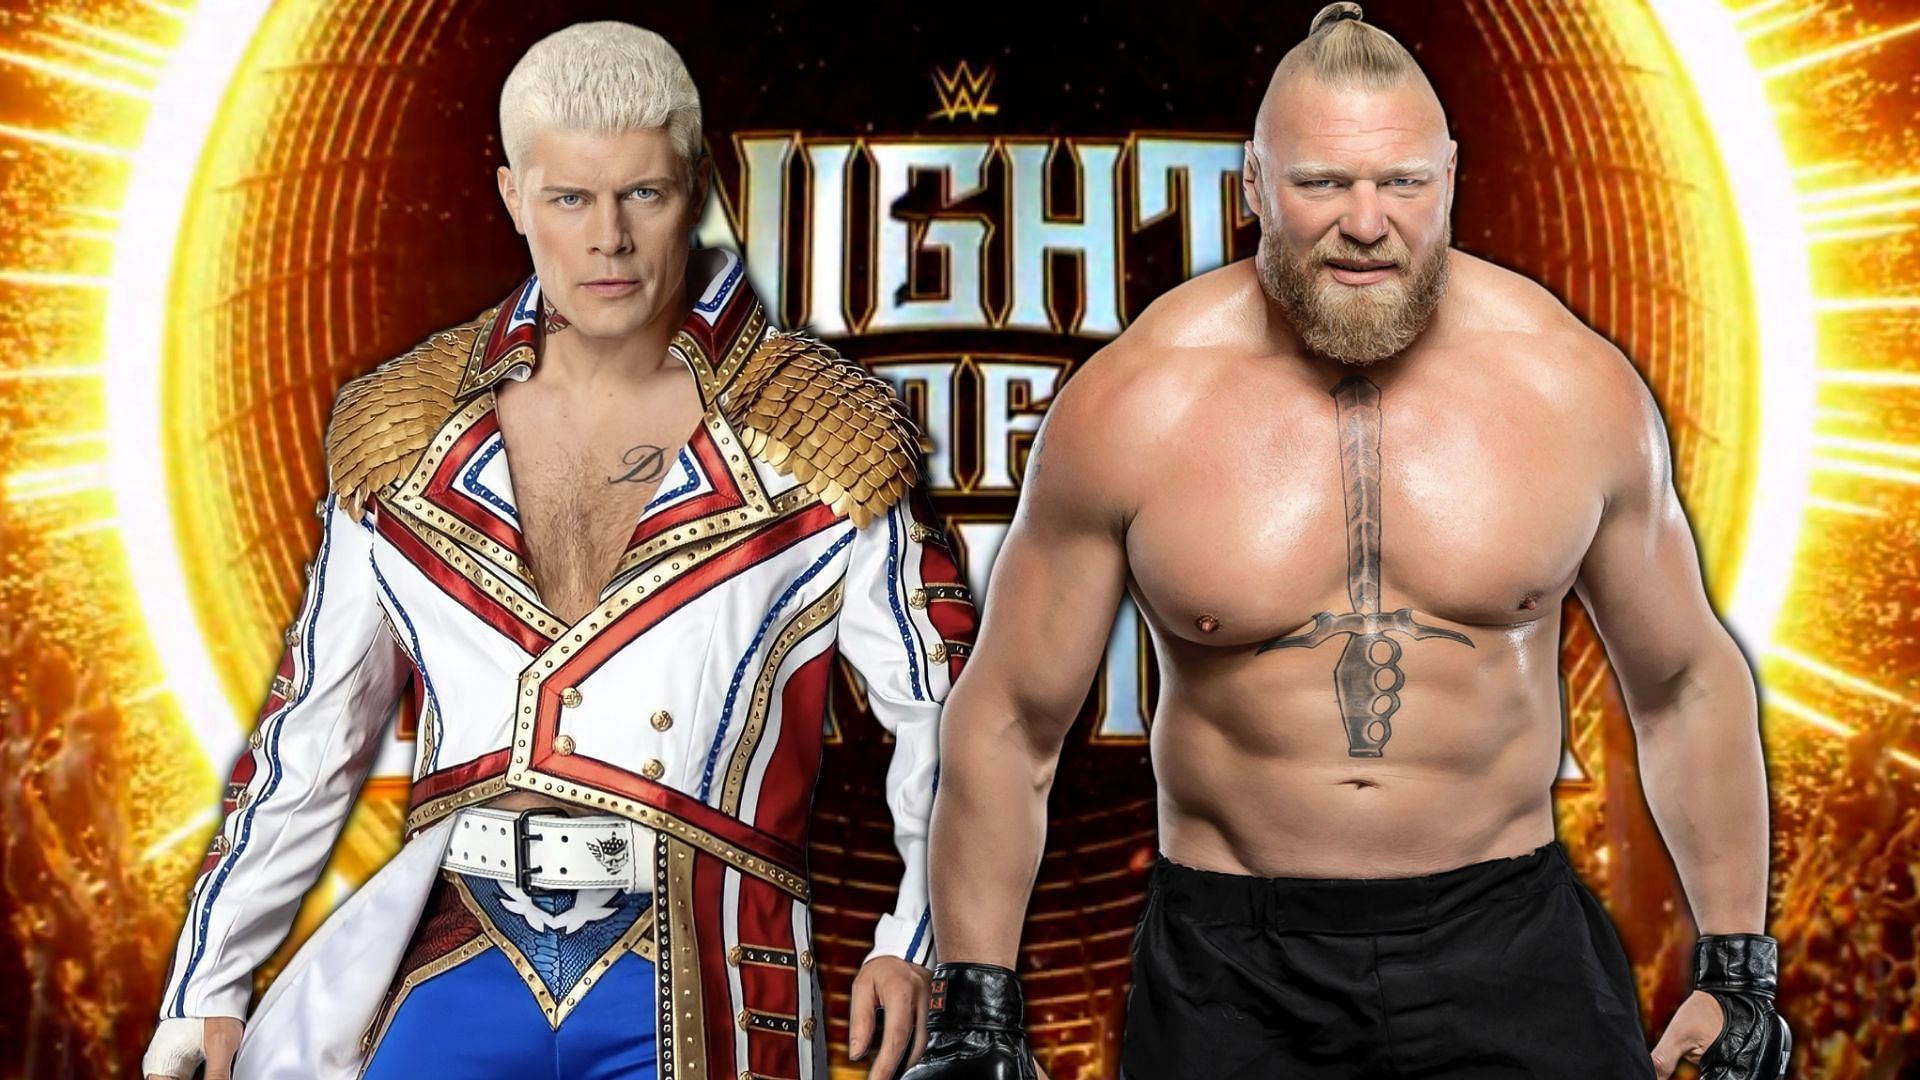 Cody Rhodes and Brock Lesnar are set to have a rematch at Night of Champions